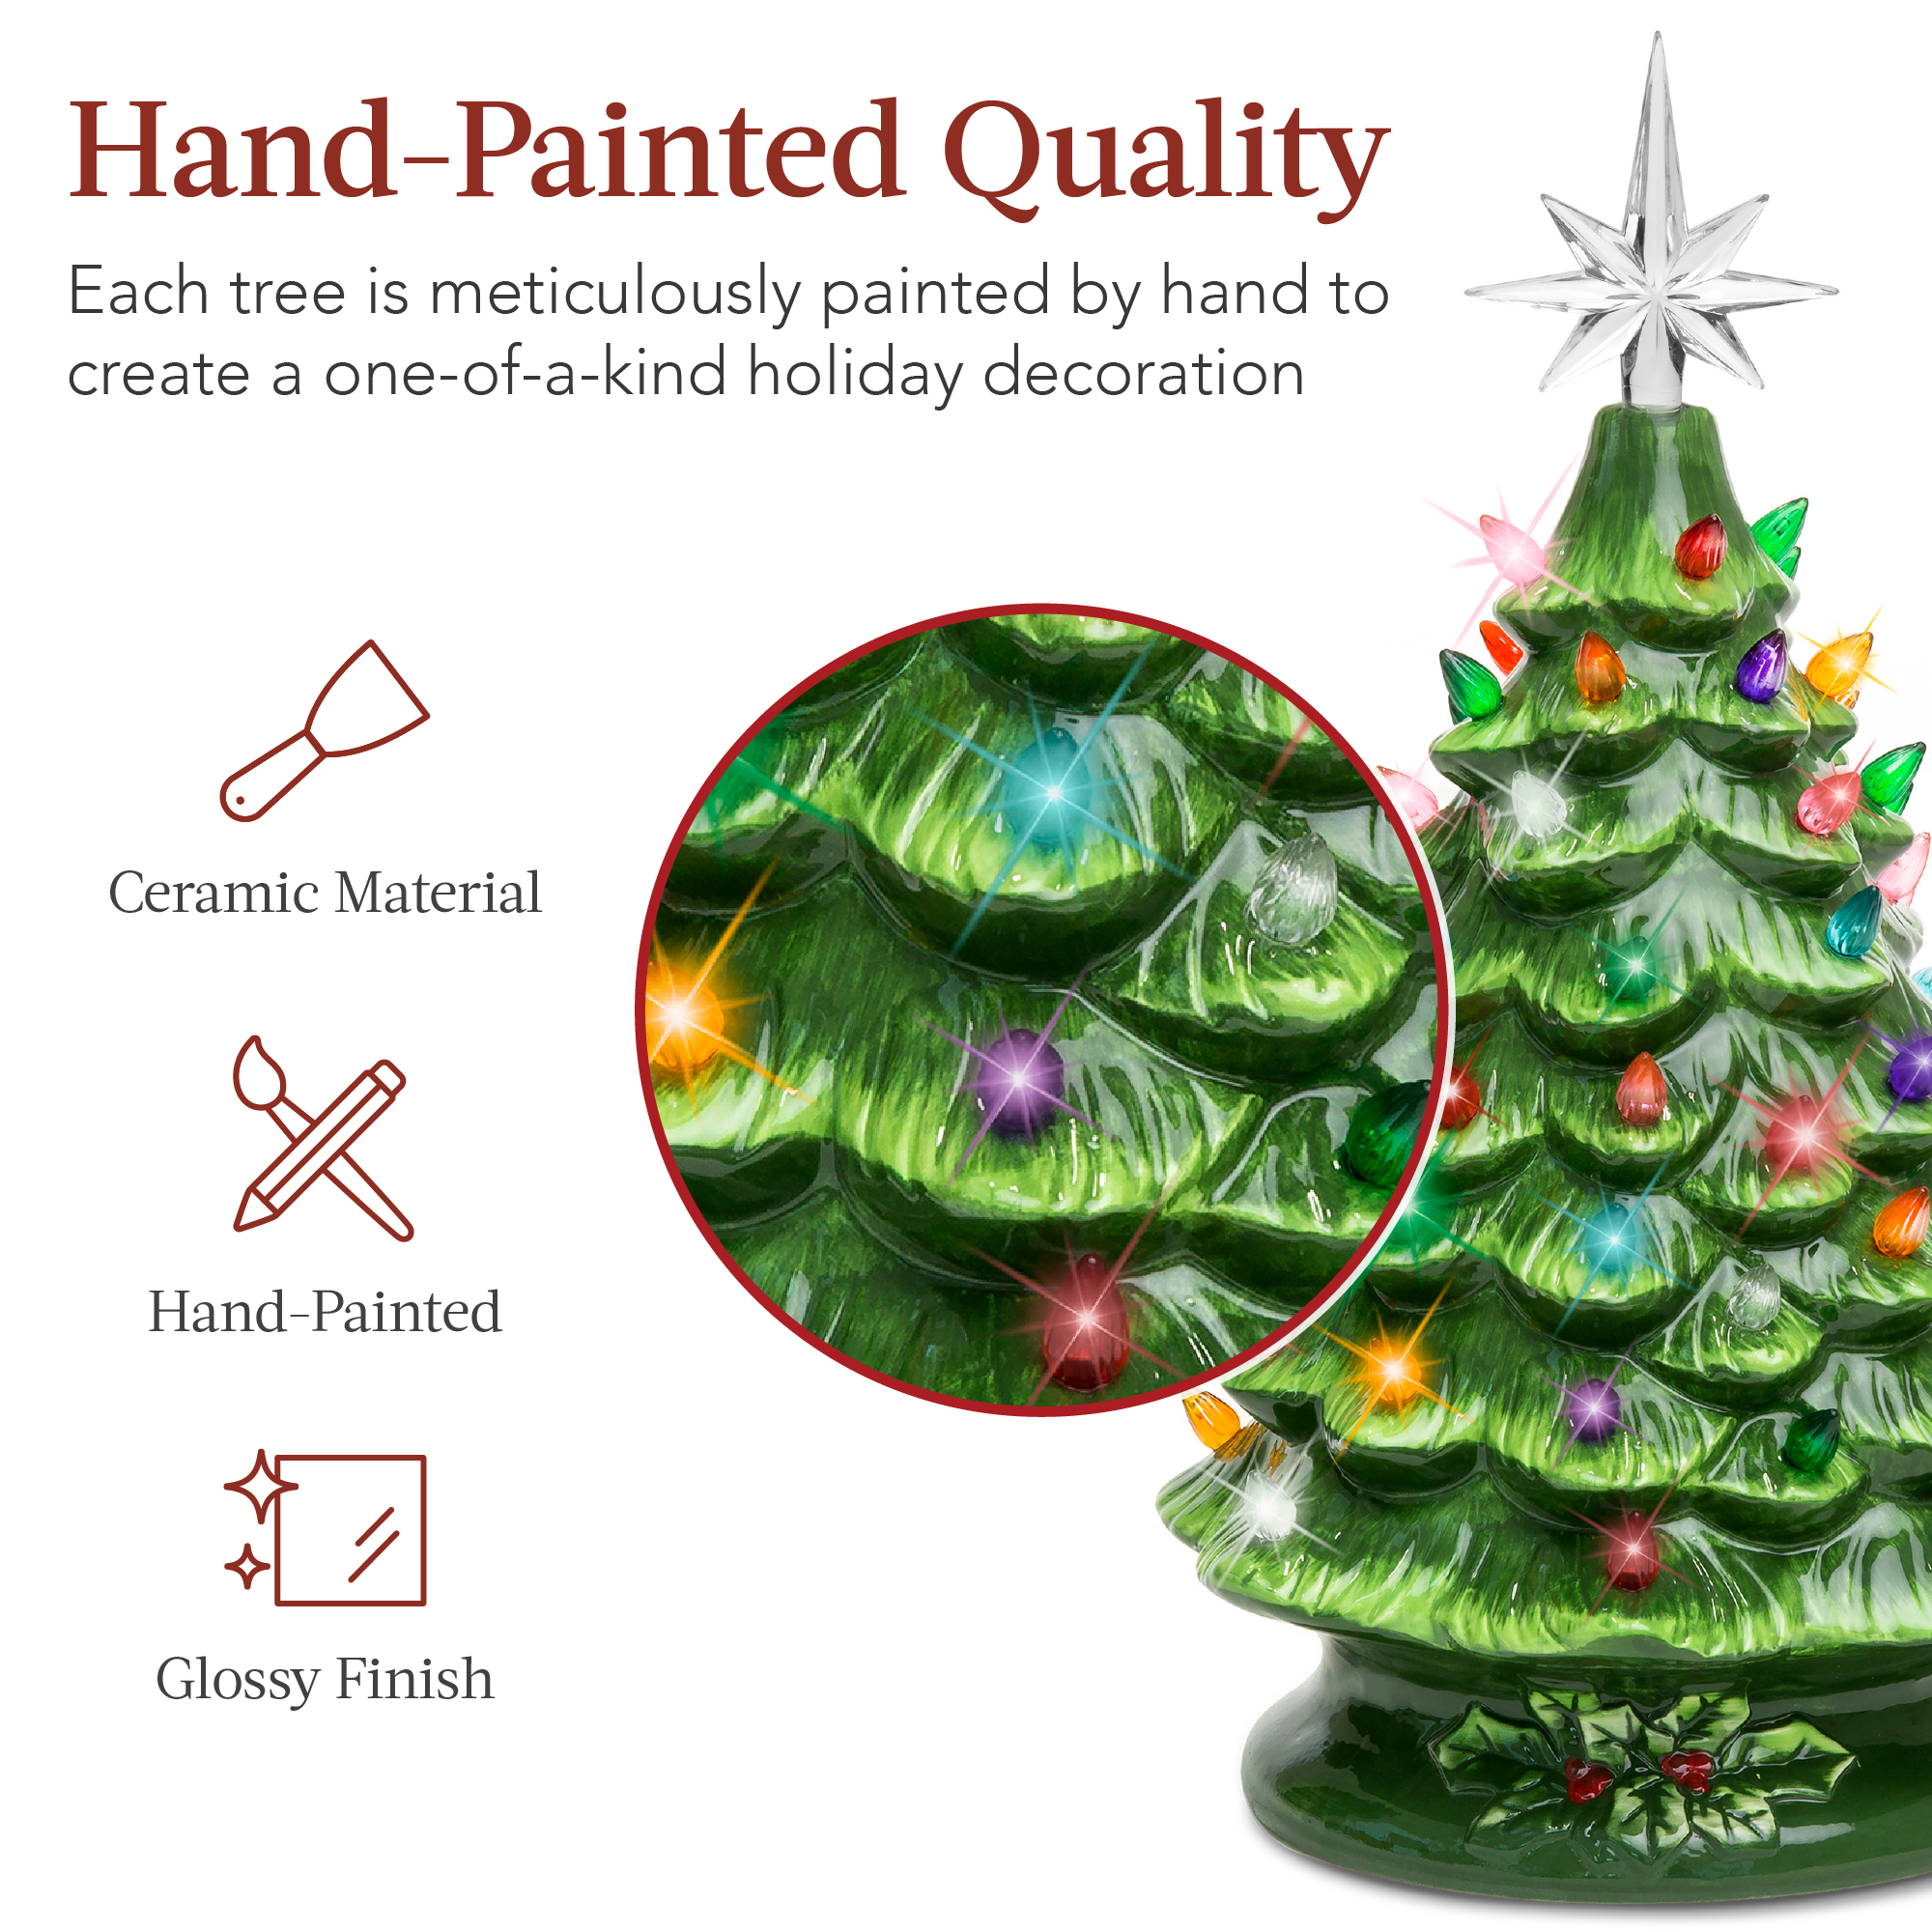 Best Choice Products 15in Ceramic Christmas Tree, Pre-lit Hand-Painted Holiday Decor w/ 64 Lights - Green w/ Multicolor Bulbs - image 4 of 7